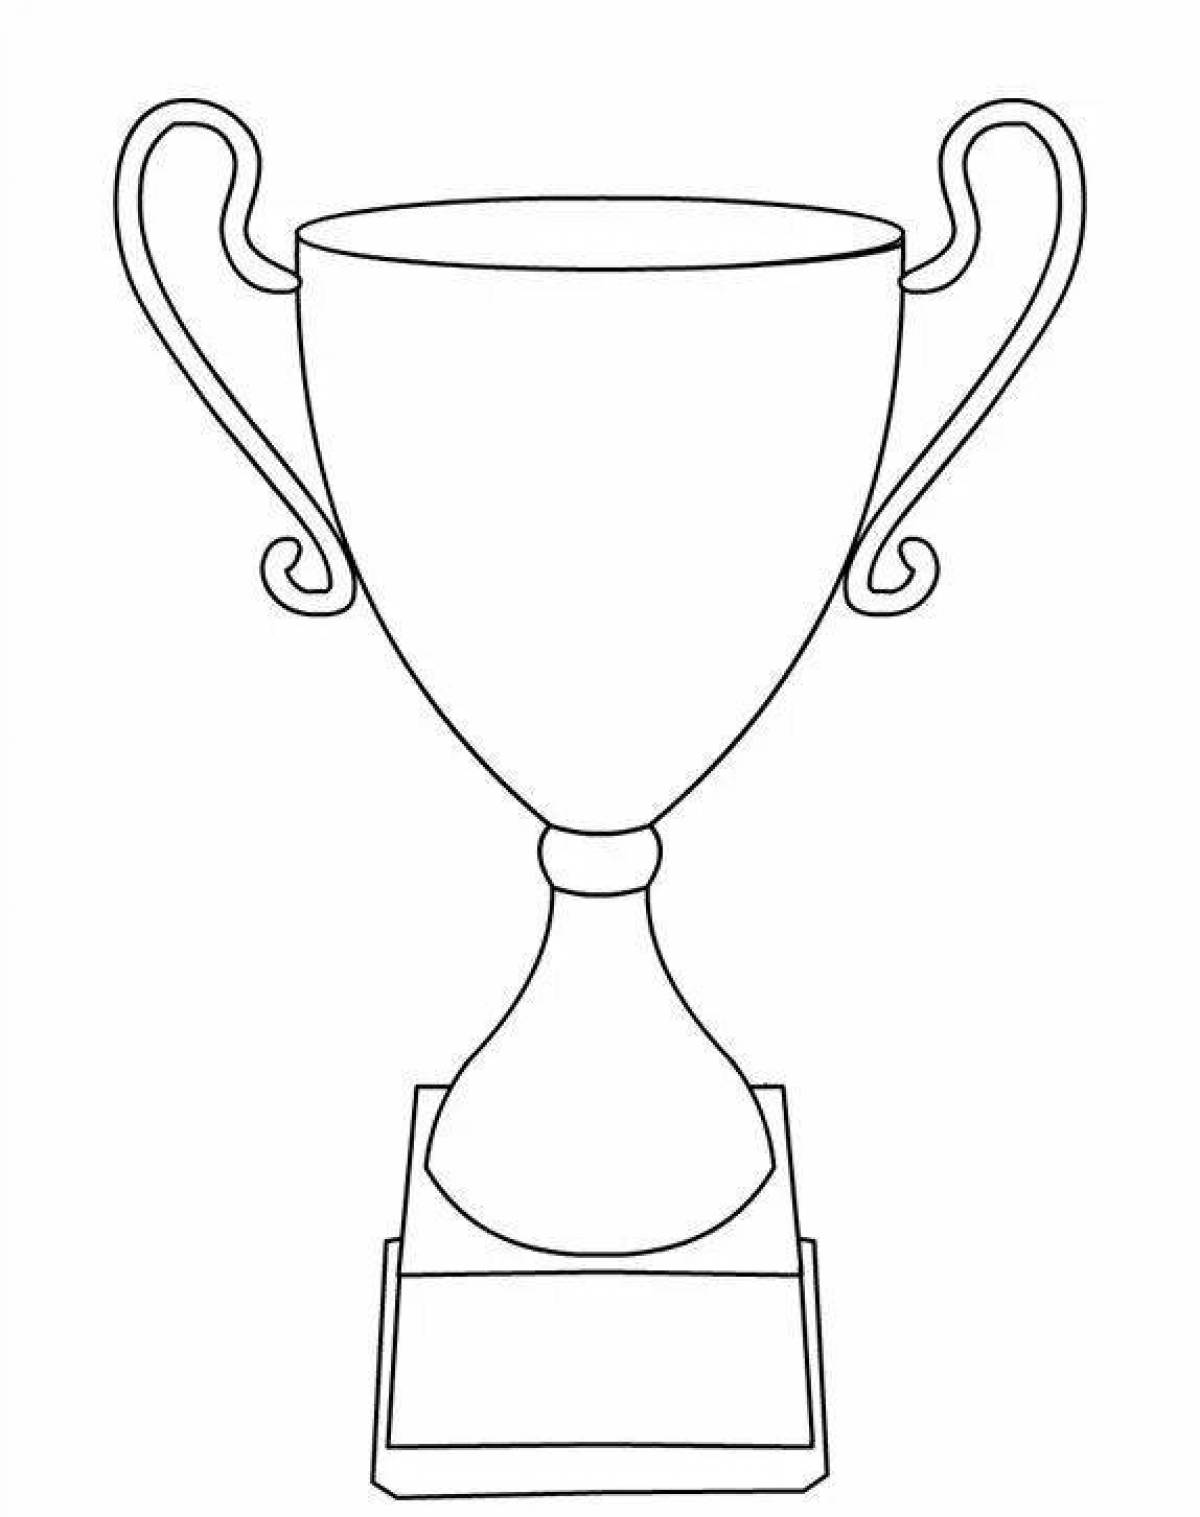 Exquisite winner cup coloring page